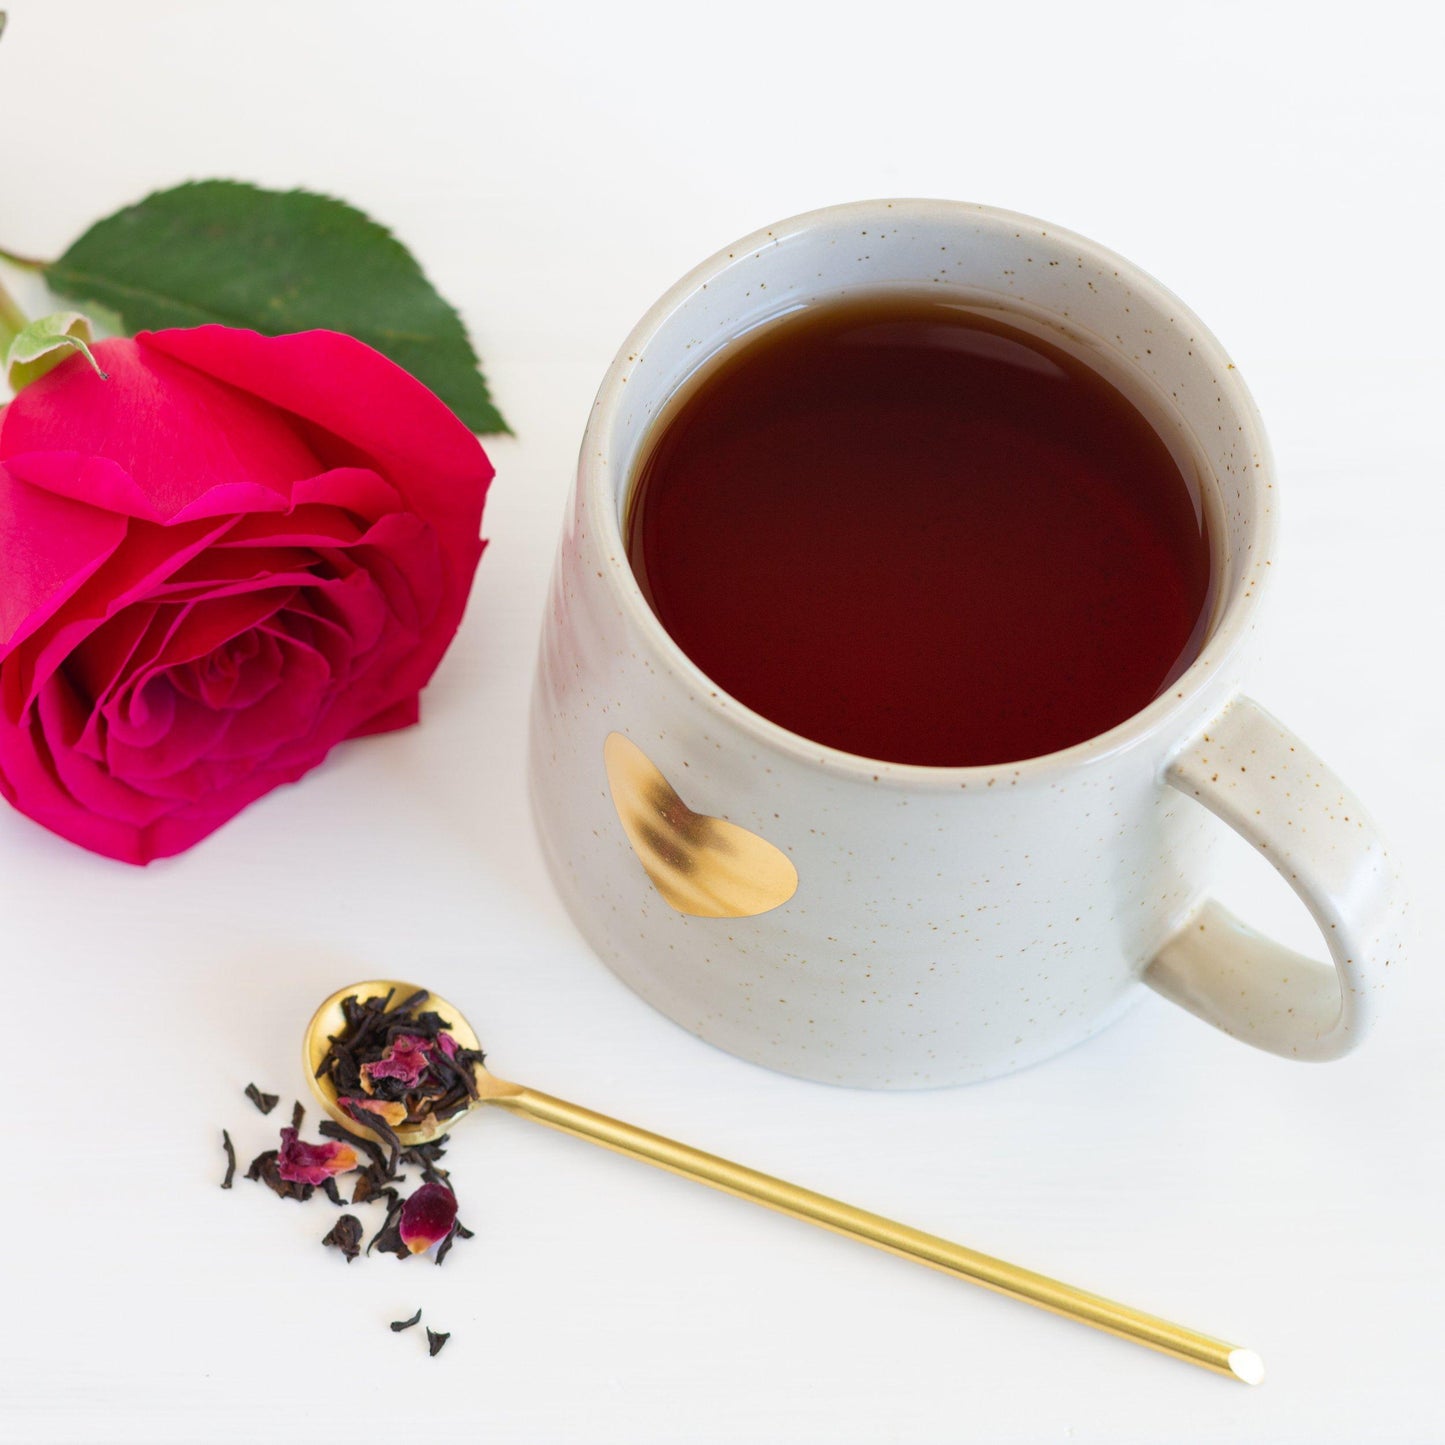 Midnight Rose Organic Black Tea shown as brewed tea in a white mug with a gold heart on it. Nearby is a dark pink rose and a thin gold spoon of tea leaves